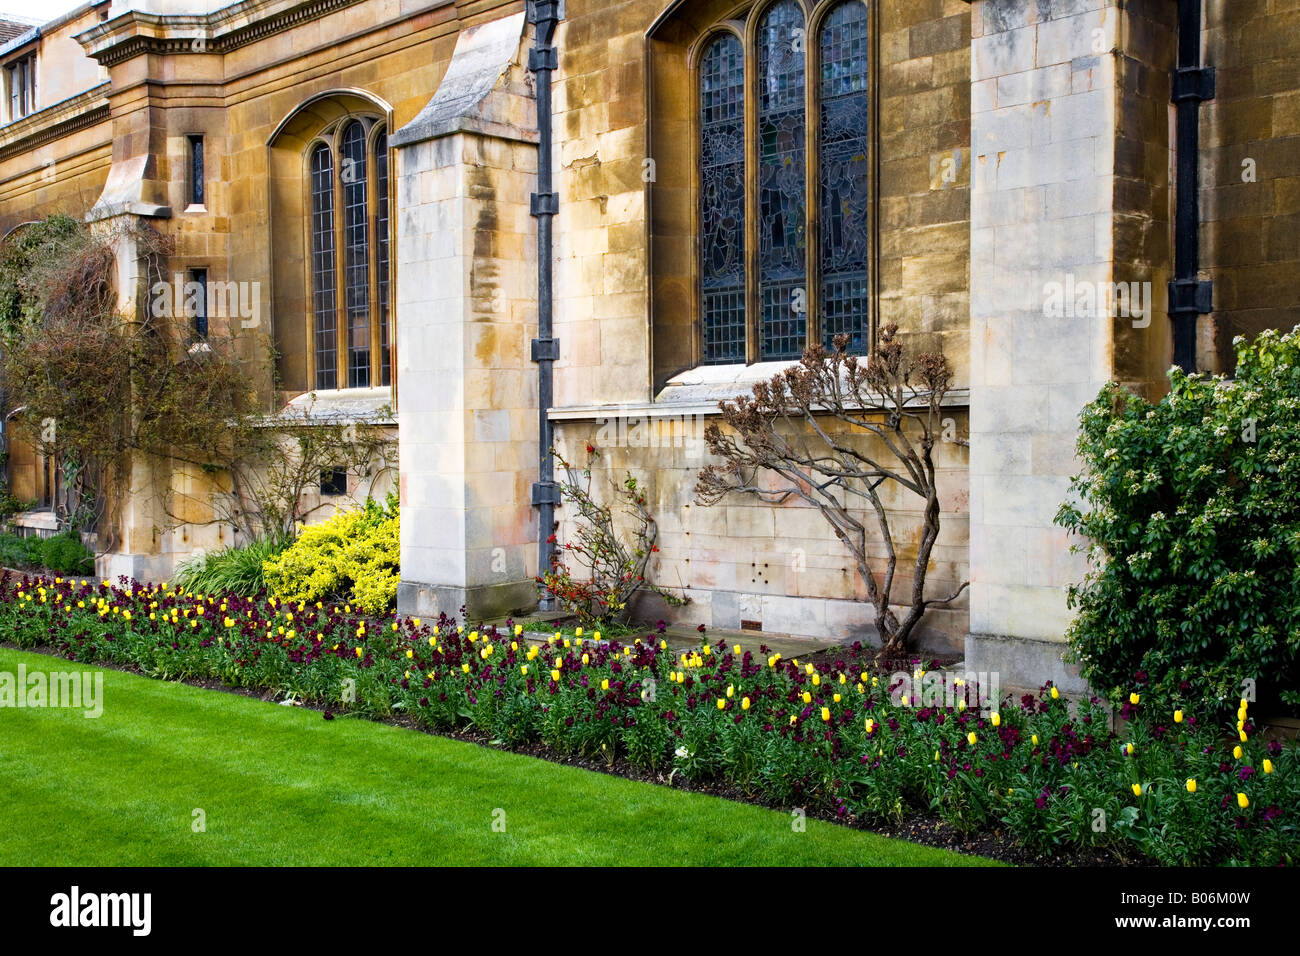 Tulips and wallflowers in front of the chapel building at Gonville & Caius College, Cambridge University, England, UK Stock Photo